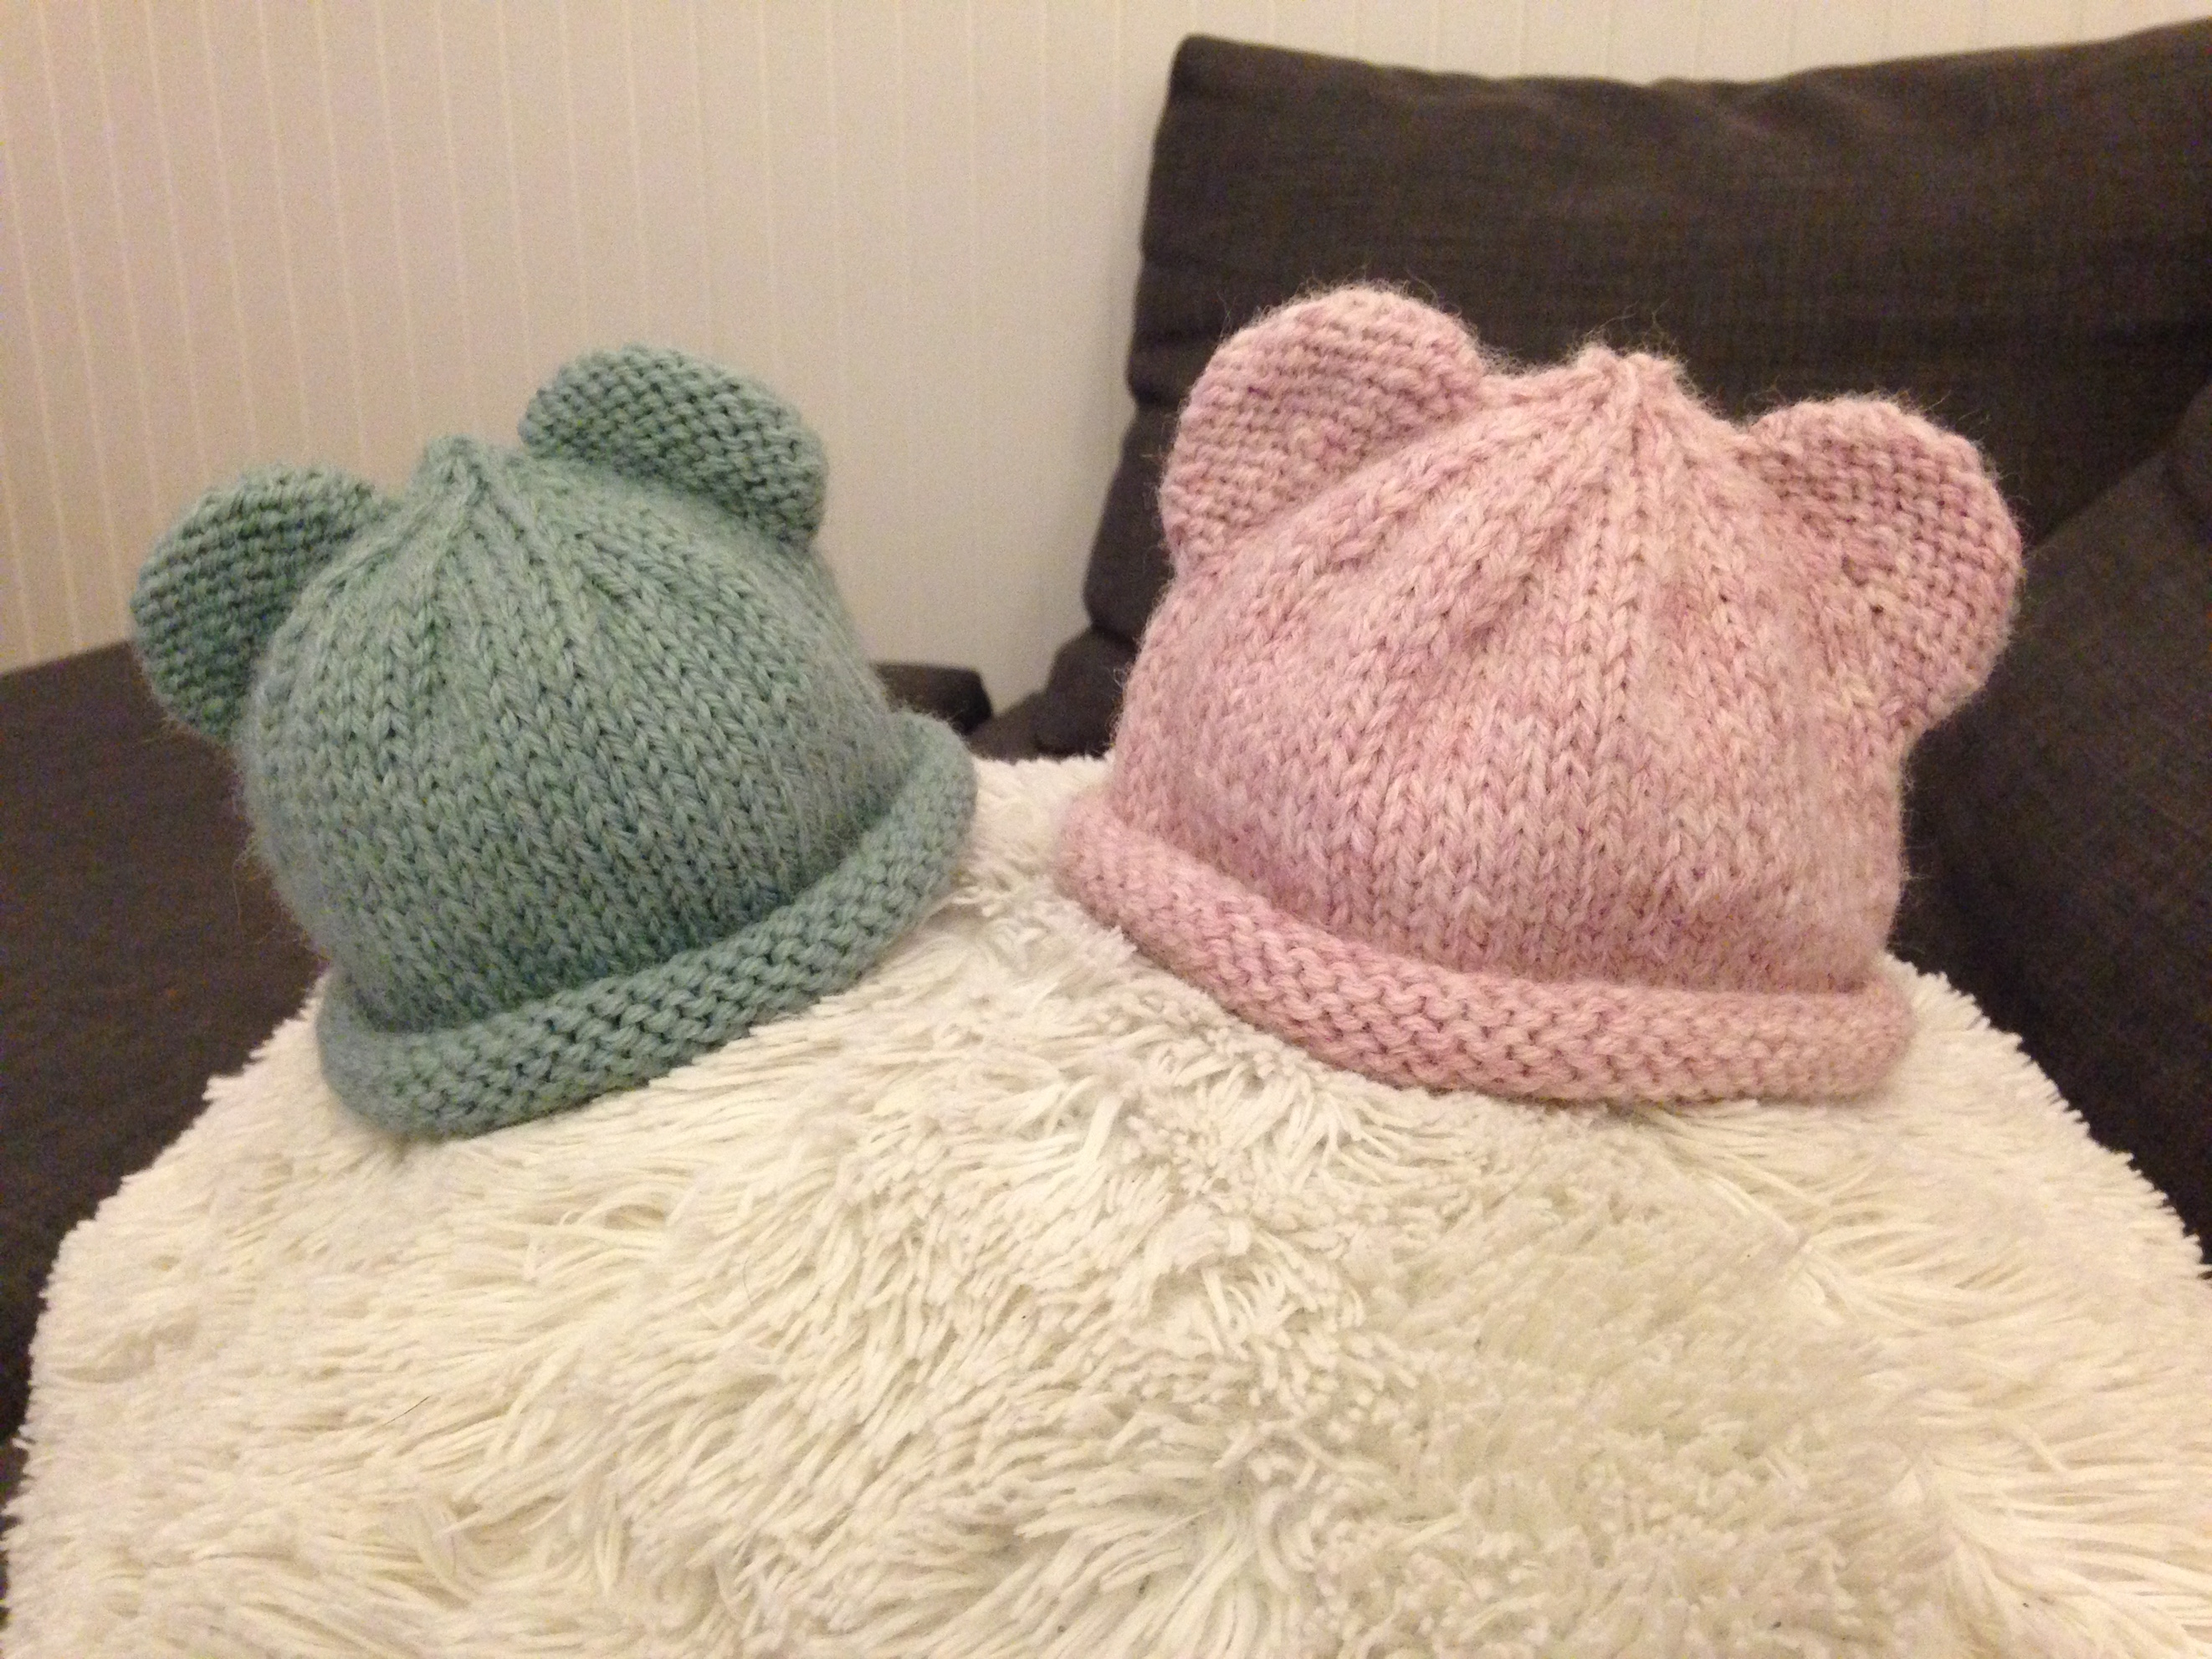 Free Knitting Patterns For Babies Hats New Zealand Ba Ear Hat Knitting Pattern Review 58e91 9ef65